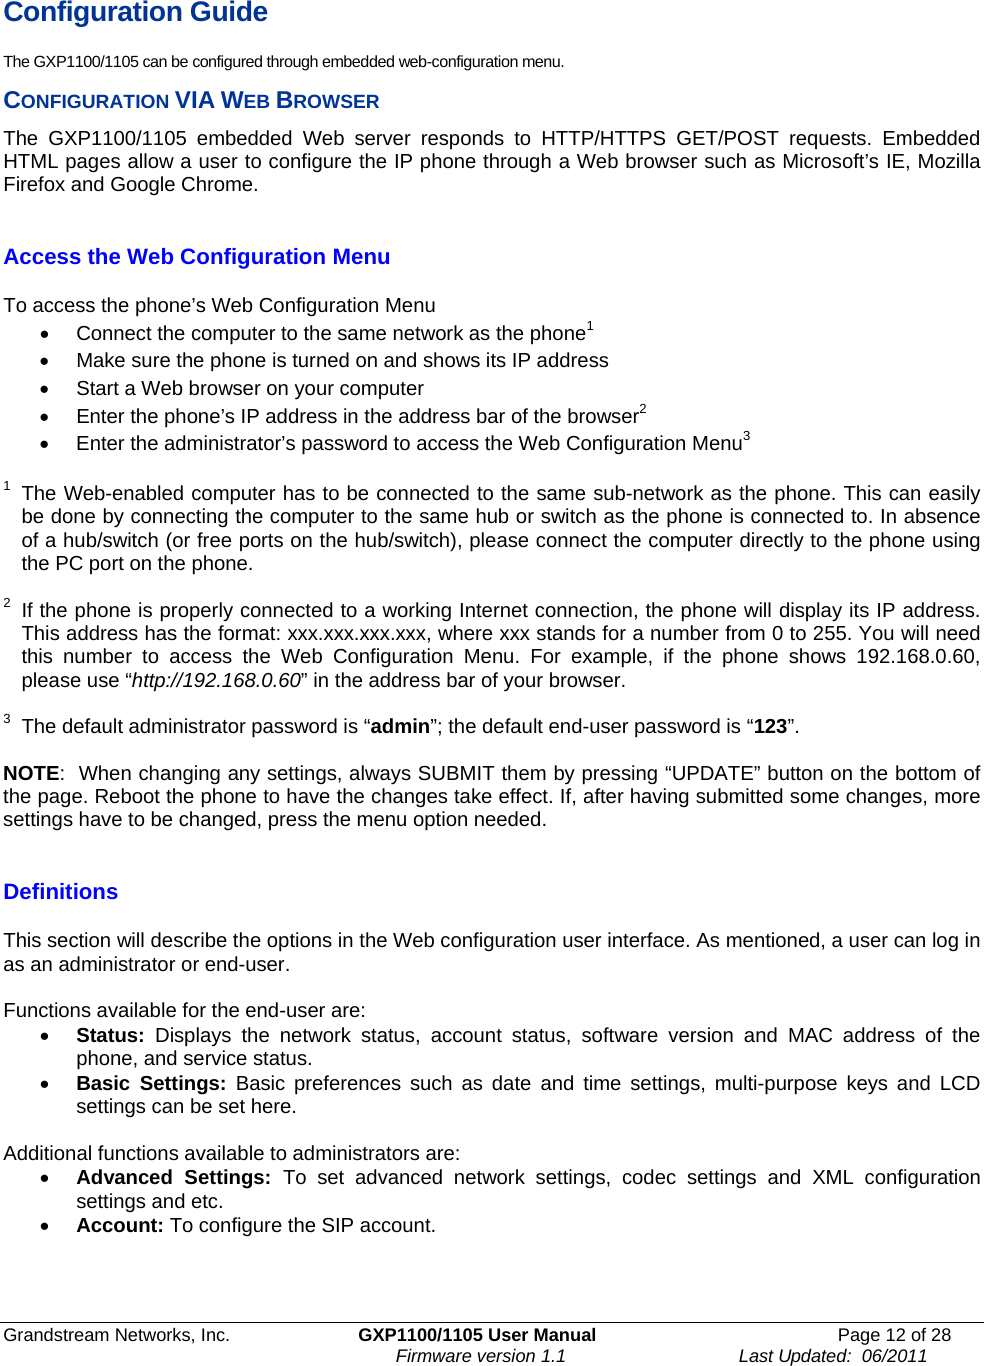 Grandstream Networks, Inc.  GXP1100/1105 User Manual  Page 12 of 28                                                                     Firmware version 1.1                                  Last Updated:  06/2011 Configuration Guide The GXP1100/1105 can be configured through embedded web-configuration menu. CONFIGURATION VIA WEB BROWSER The GXP1100/1105 embedded Web server responds to HTTP/HTTPS GET/POST requests. Embedded HTML pages allow a user to configure the IP phone through a Web browser such as Microsoft’s IE, Mozilla Firefox and Google Chrome.   Access the Web Configuration Menu  To access the phone’s Web Configuration Menu •  Connect the computer to the same network as the phone1 •  Make sure the phone is turned on and shows its IP address •  Start a Web browser on your computer •  Enter the phone’s IP address in the address bar of the browser2 •  Enter the administrator’s password to access the Web Configuration Menu3  1  The Web-enabled computer has to be connected to the same sub-network as the phone. This can easily be done by connecting the computer to the same hub or switch as the phone is connected to. In absence of a hub/switch (or free ports on the hub/switch), please connect the computer directly to the phone using the PC port on the phone.   2  If the phone is properly connected to a working Internet connection, the phone will display its IP address. This address has the format: xxx.xxx.xxx.xxx, where xxx stands for a number from 0 to 255. You will need this number to access the Web Configuration Menu. For example, if the phone shows 192.168.0.60, please use “http://192.168.0.60” in the address bar of your browser.  3  The default administrator password is “admin”; the default end-user password is “123”.  NOTE:  When changing any settings, always SUBMIT them by pressing “UPDATE” button on the bottom of the page. Reboot the phone to have the changes take effect. If, after having submitted some changes, more settings have to be changed, press the menu option needed.  Definitions  This section will describe the options in the Web configuration user interface. As mentioned, a user can log in as an administrator or end-user.   Functions available for the end-user are: • Status: Displays the network status, account status, software version and MAC address of the phone, and service status. • Basic Settings: Basic preferences such as date and time settings, multi-purpose keys and LCD settings can be set here.  Additional functions available to administrators are: • Advanced Settings: To set advanced network settings, codec settings and XML configuration settings and etc.  • Account: To configure the SIP account.    